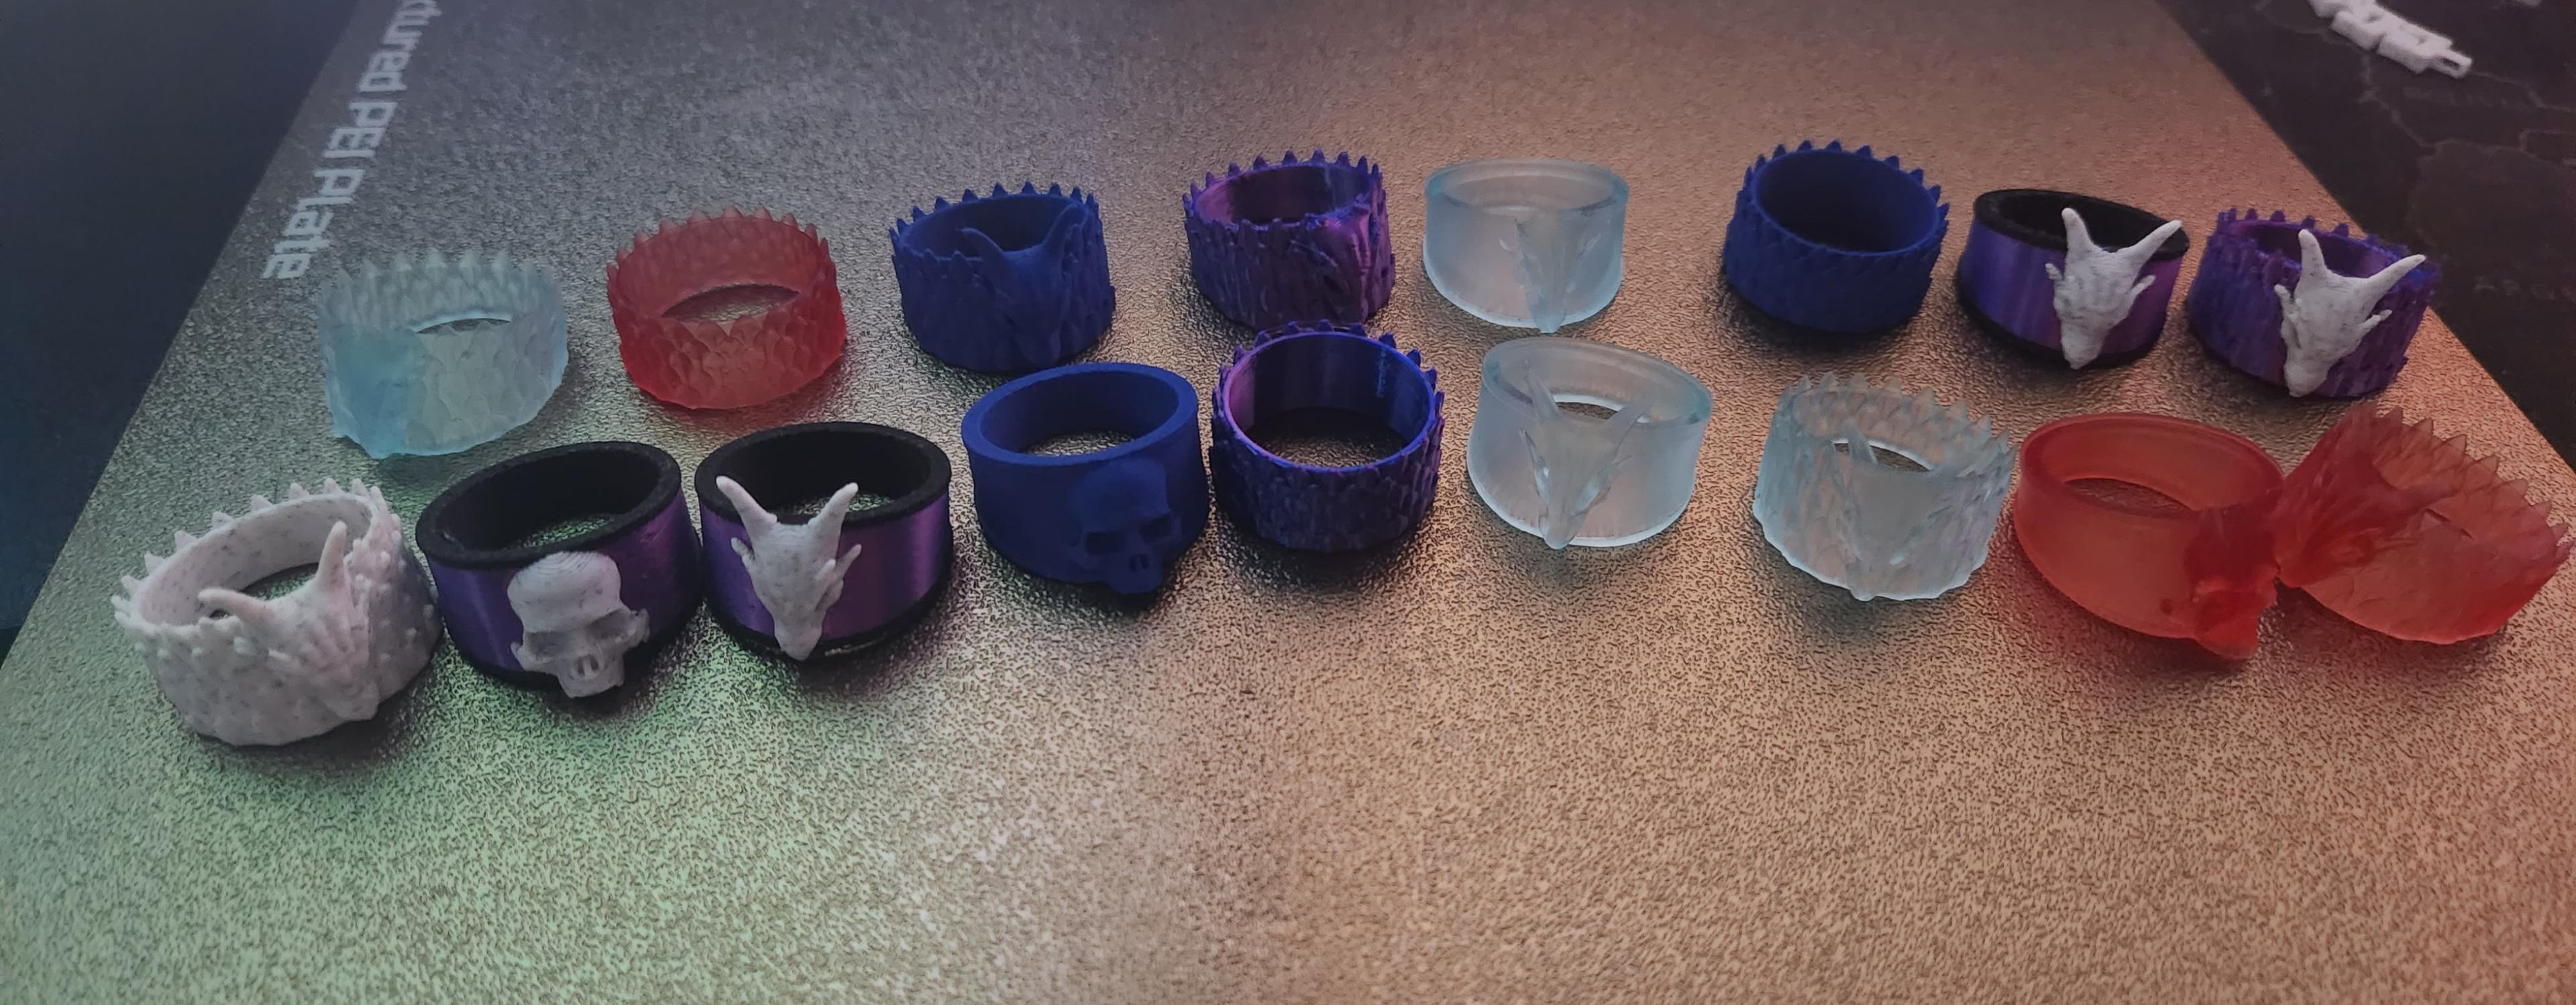 13 New ring designs and side project progress